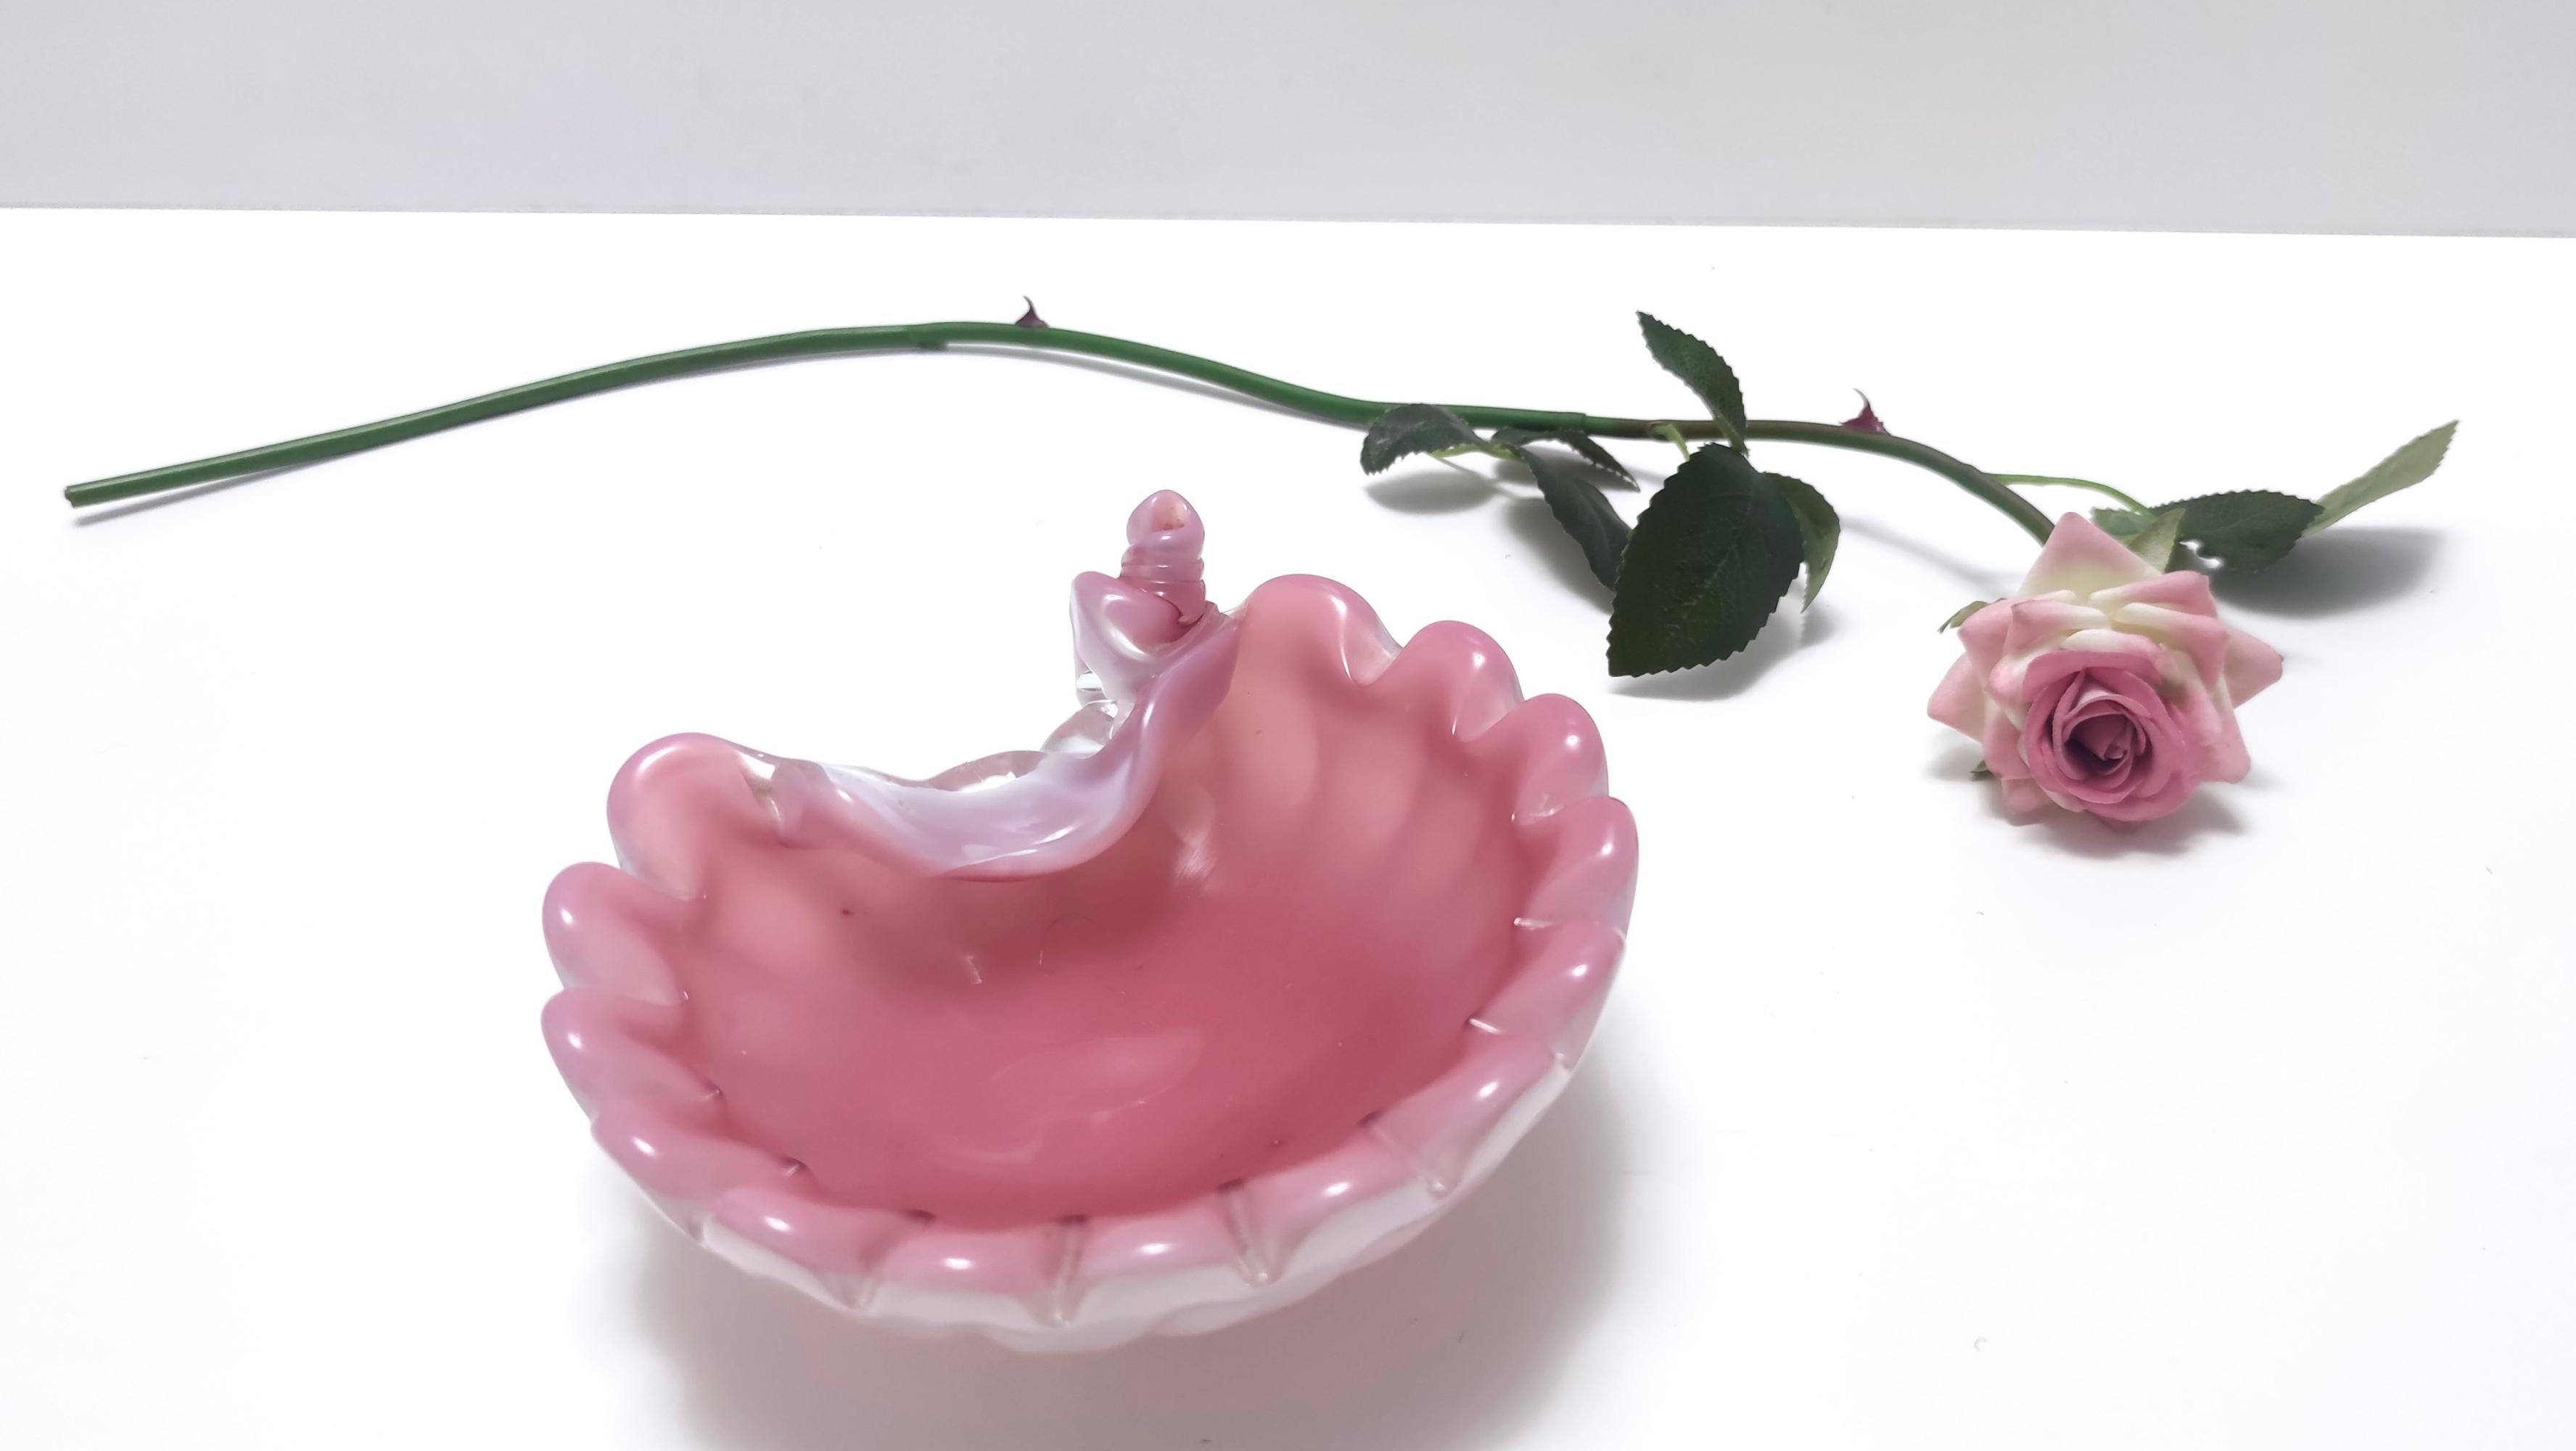 Opalescent shell bowl / ashtray by Fratelli Toso, Italy, circa 1959.
This shell bowl / ashtray is made in pink hand-blown opaline glass under 'lattimo' glass opalescent ribs, with a scalloped rim and folded ends.
In perfect original condition and